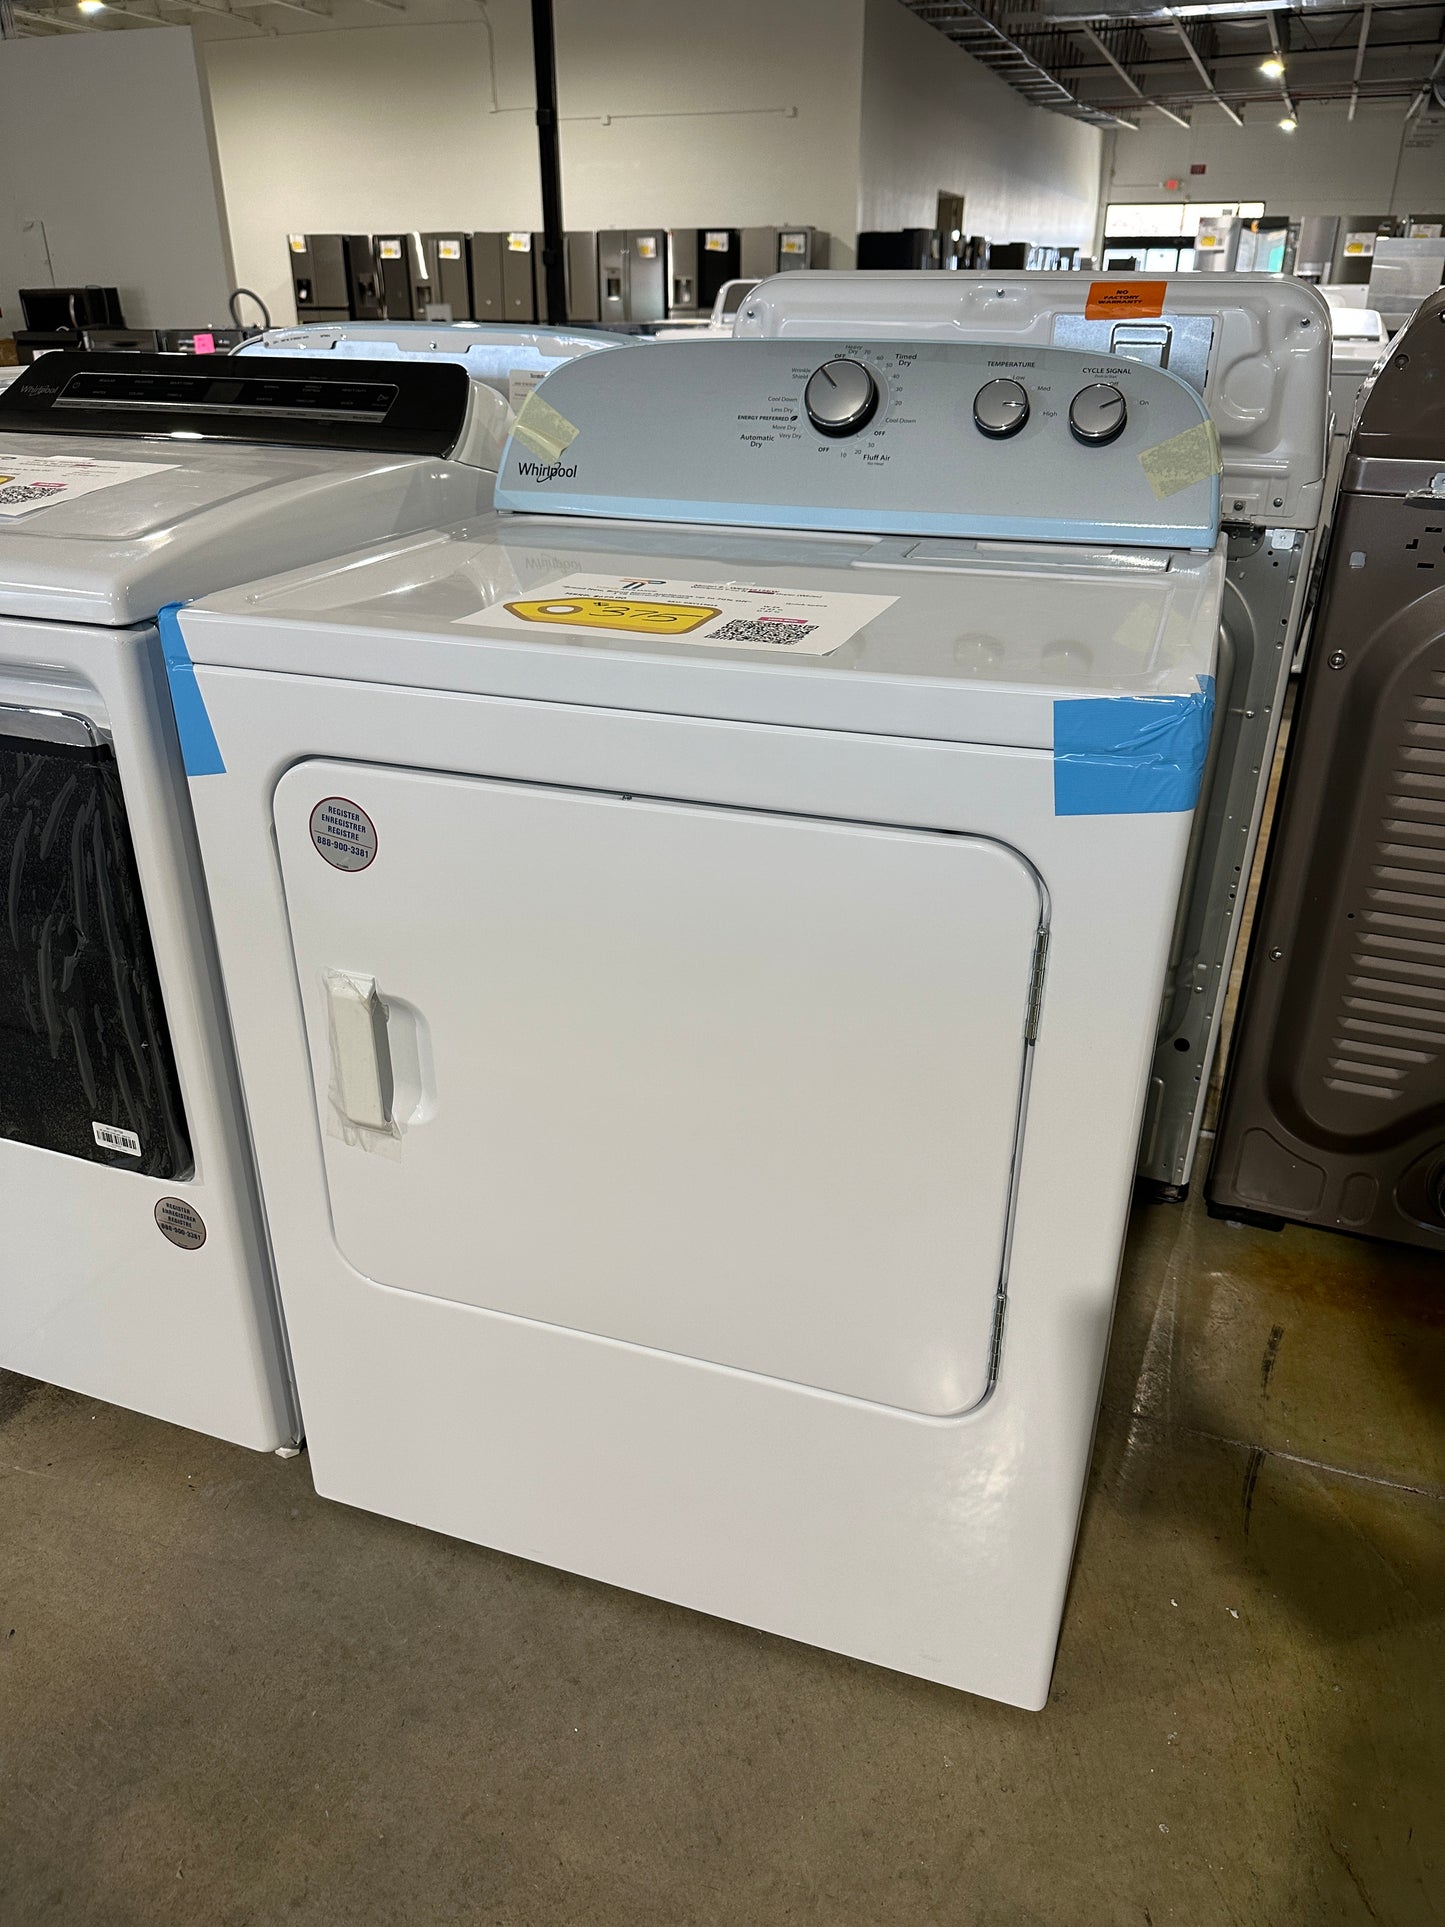 Whirlpool - 7 Cu. Ft. Electric Dryer with AutoDry Drying System - White  MODEL: WED4815EW  DRY11986S